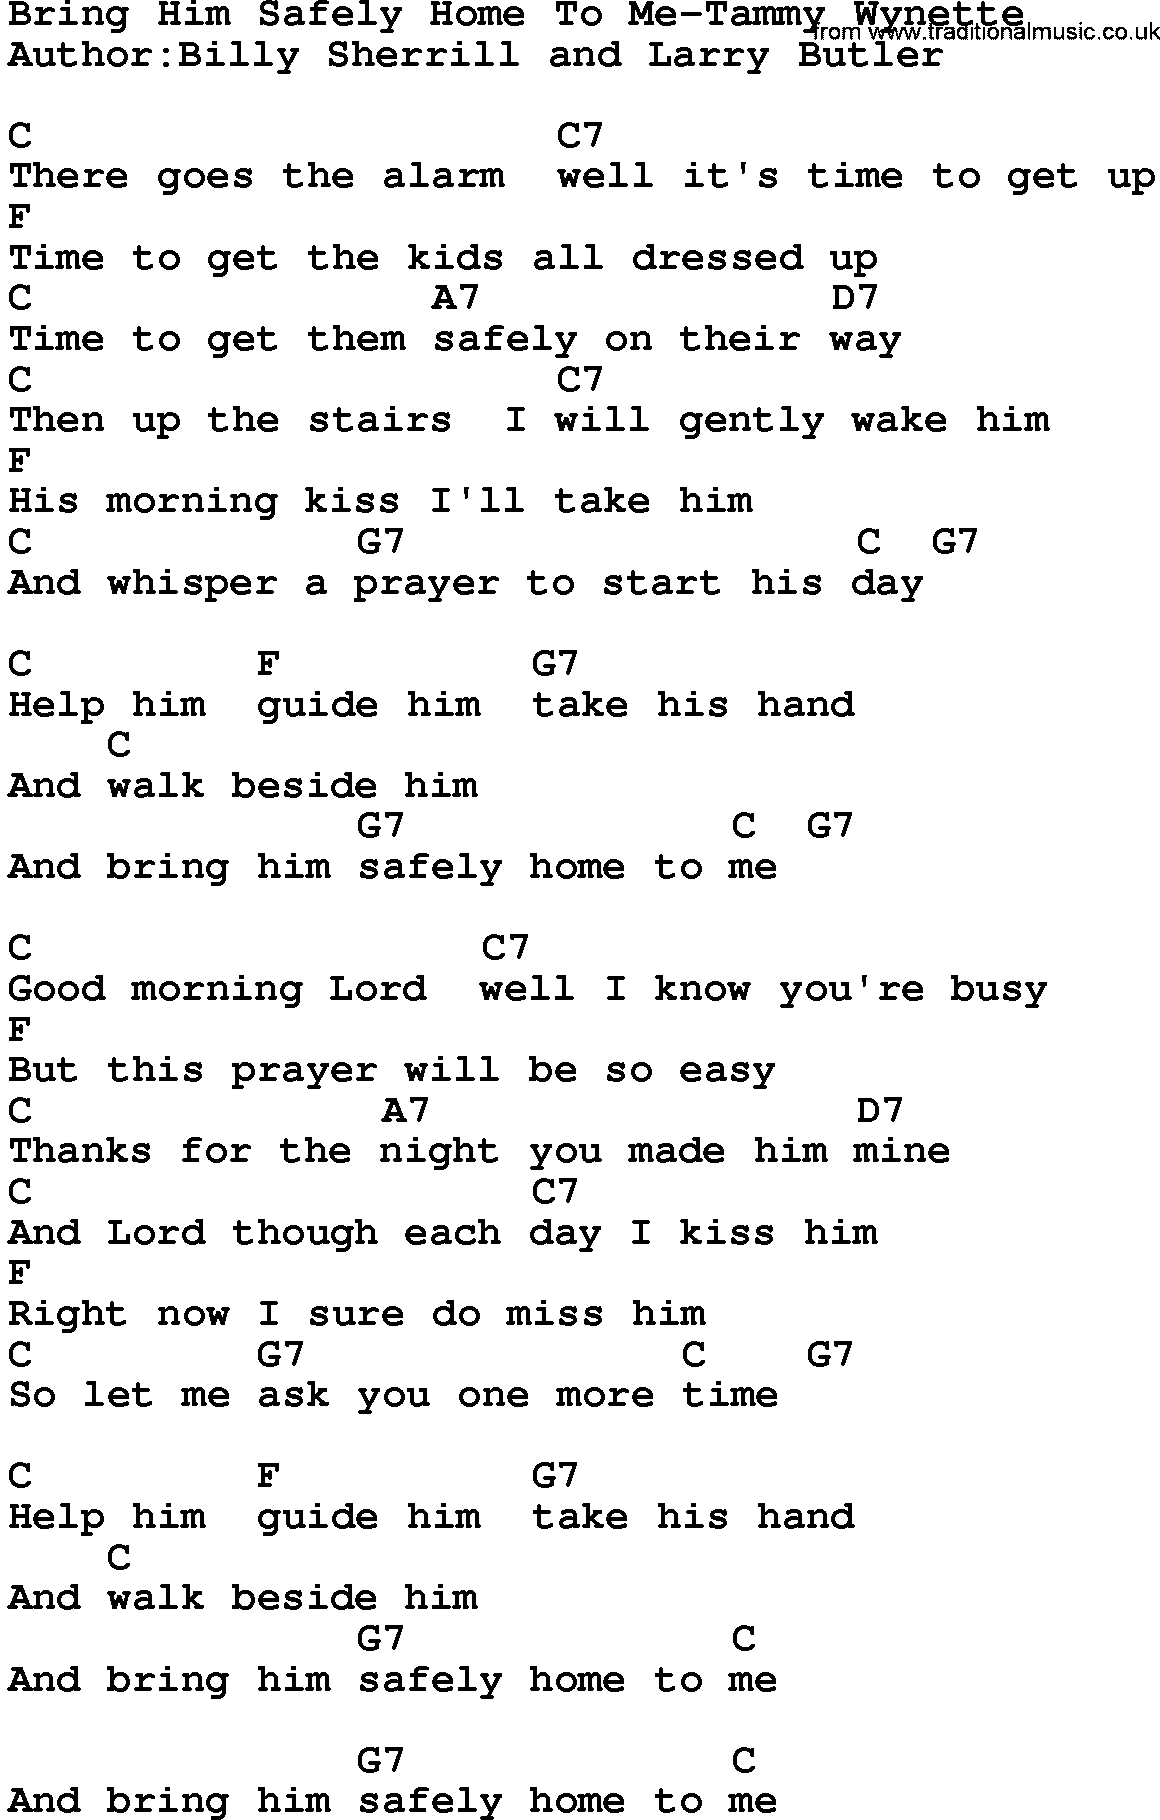 Country music song: Bring Him Safely Home To Me-Tammy Wynette lyrics and chords